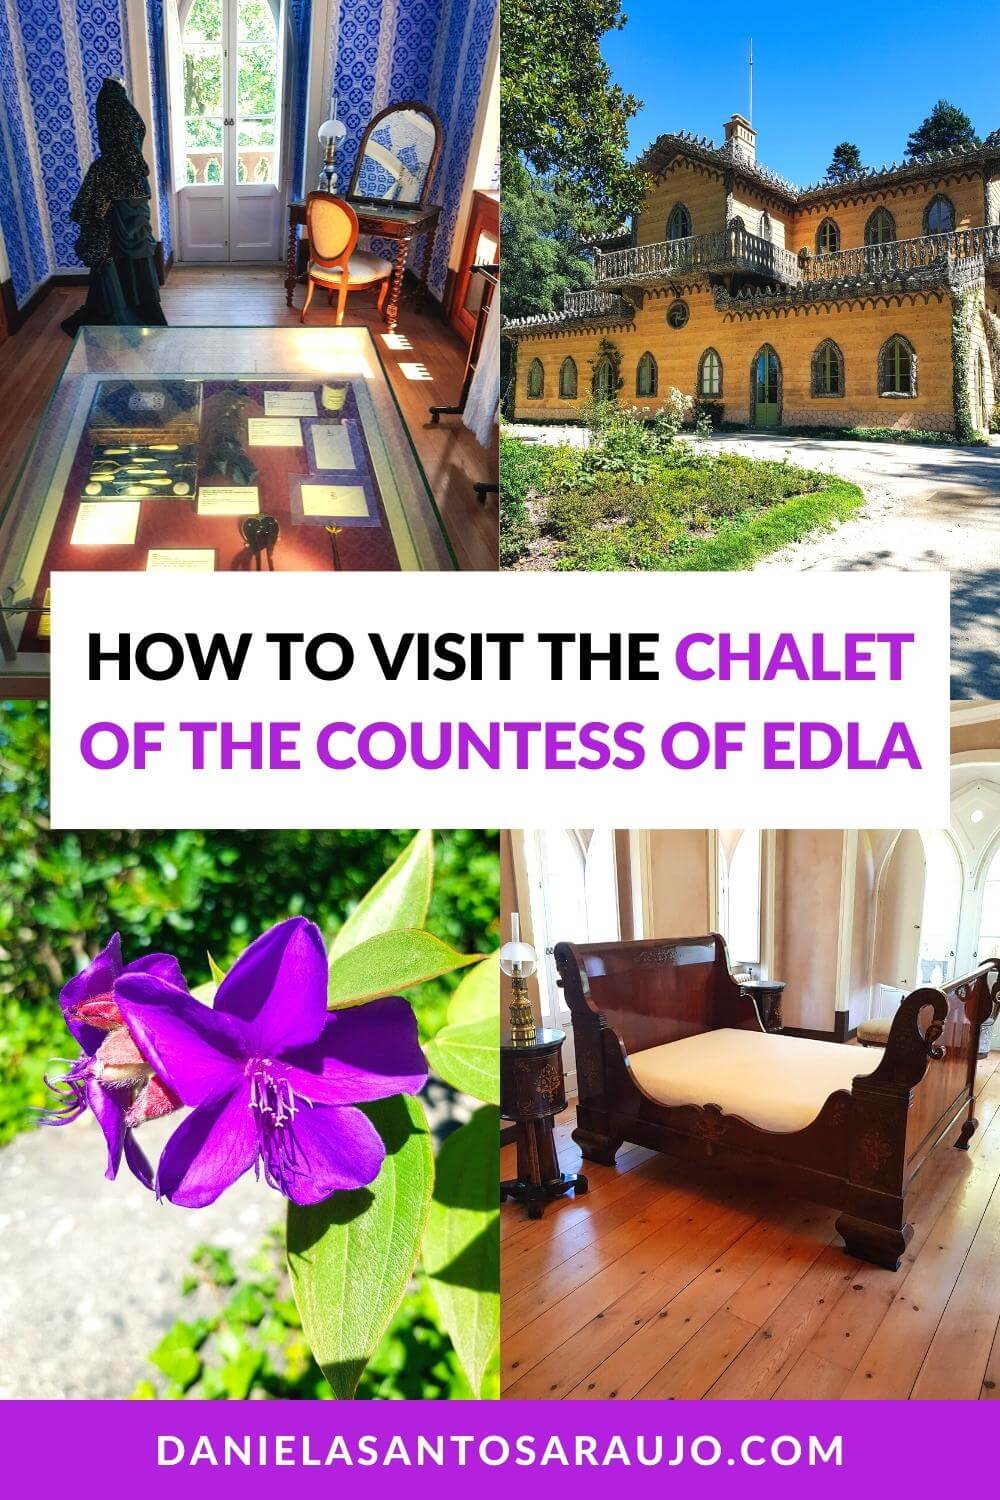 Chalet of the Countess of Edla